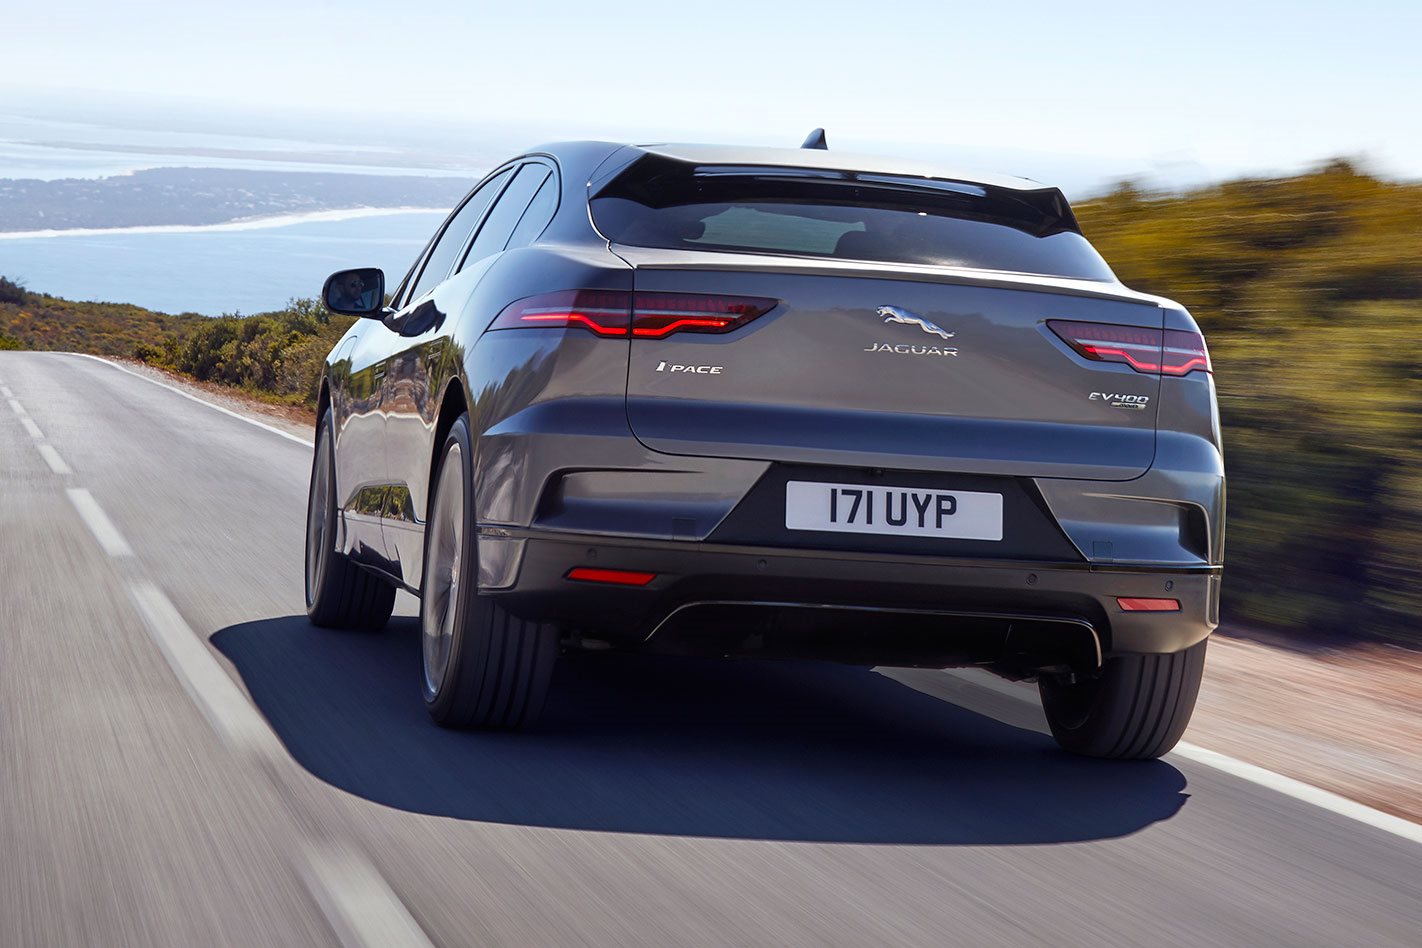 2018 Jaguar I-Pace: The electric car that wants to get to know you